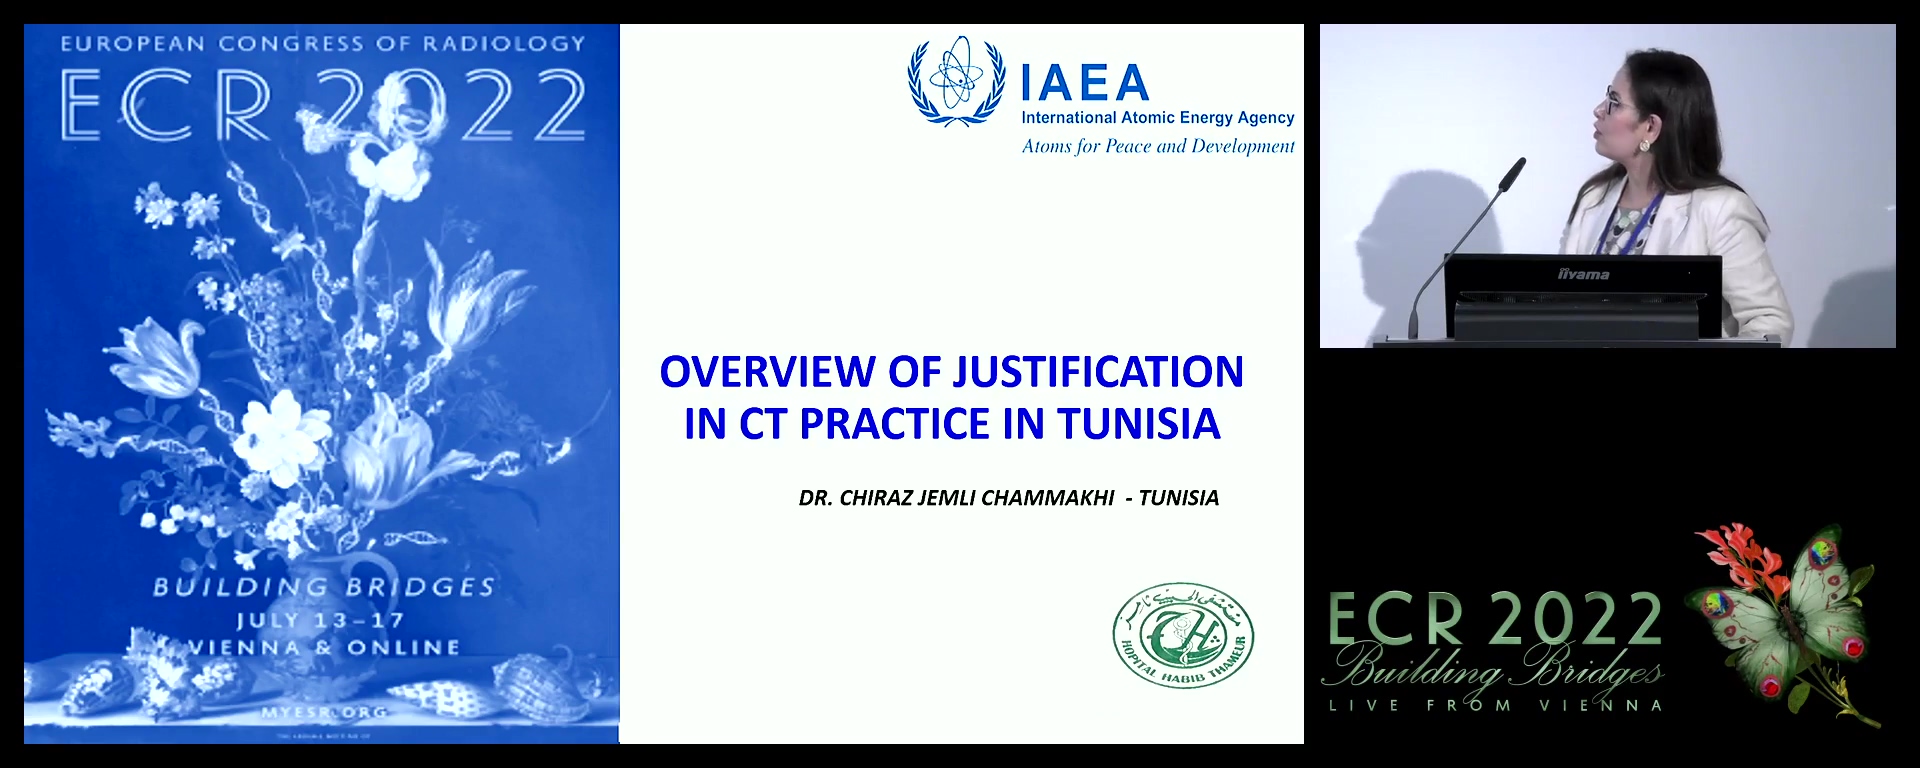 Overview of justification in CT practice in Tunisia - Chiraz Chammakhi, Tunis / TN